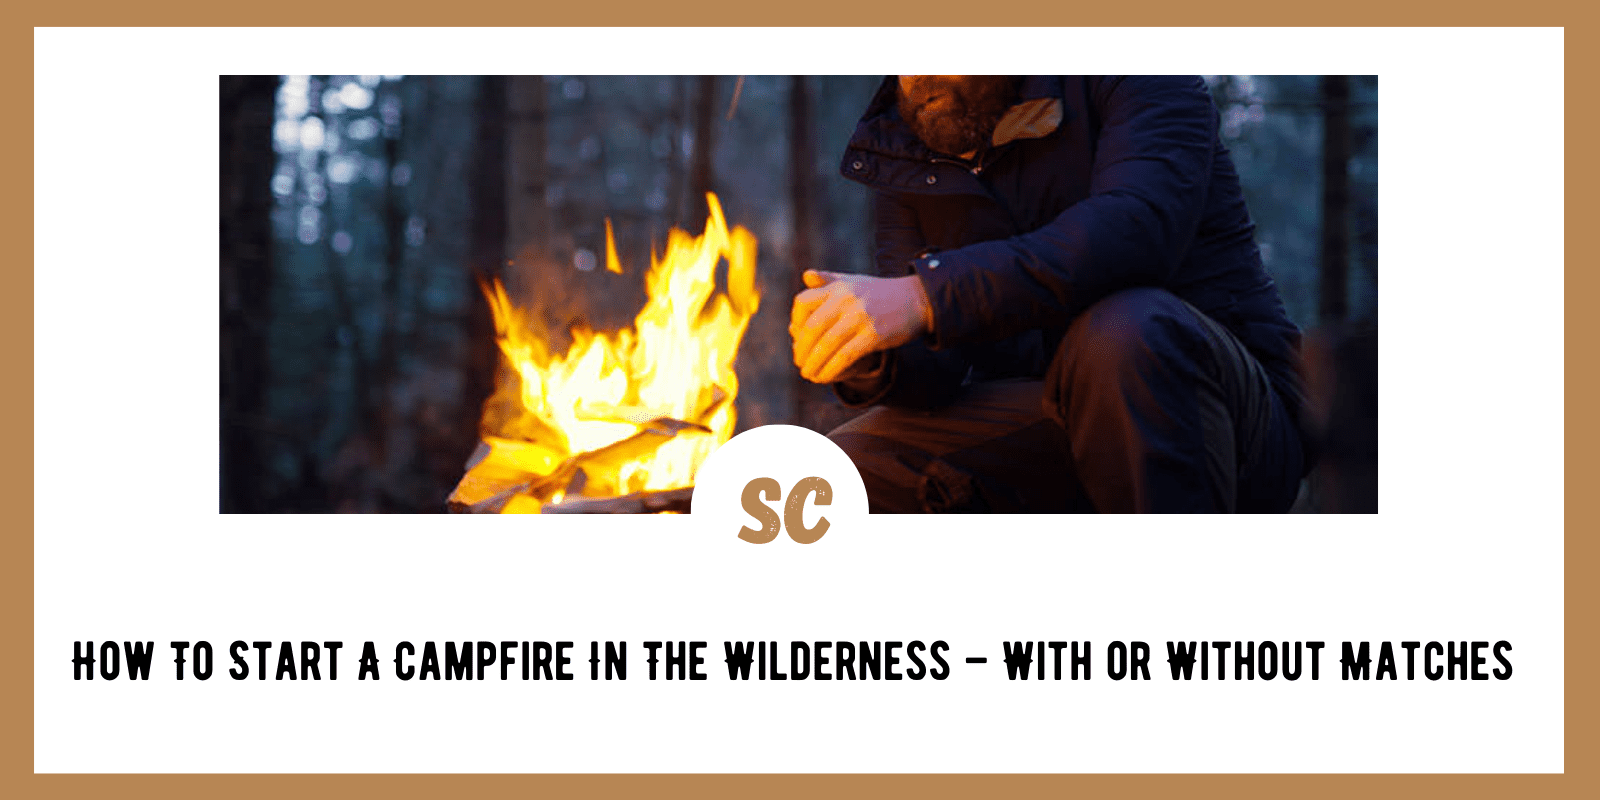 How To Start A Campfire In The Wilderness – With or Without Matches